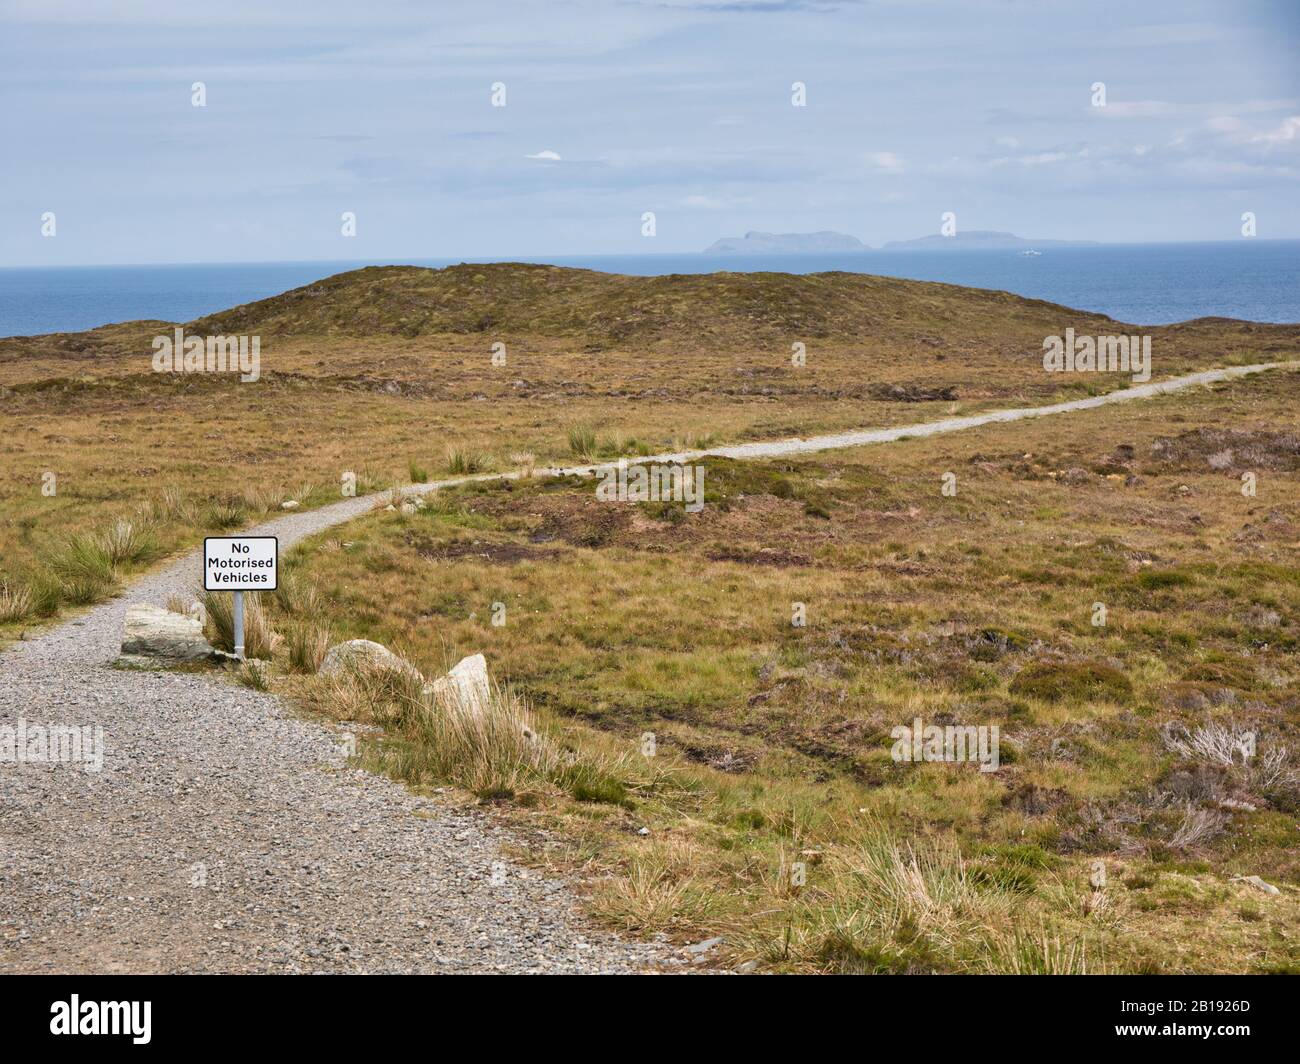 No motorised vehicles warning sign on gravel footpath, Island of Lewis and Harris, Outer Hebrides, Scotland Stock Photo